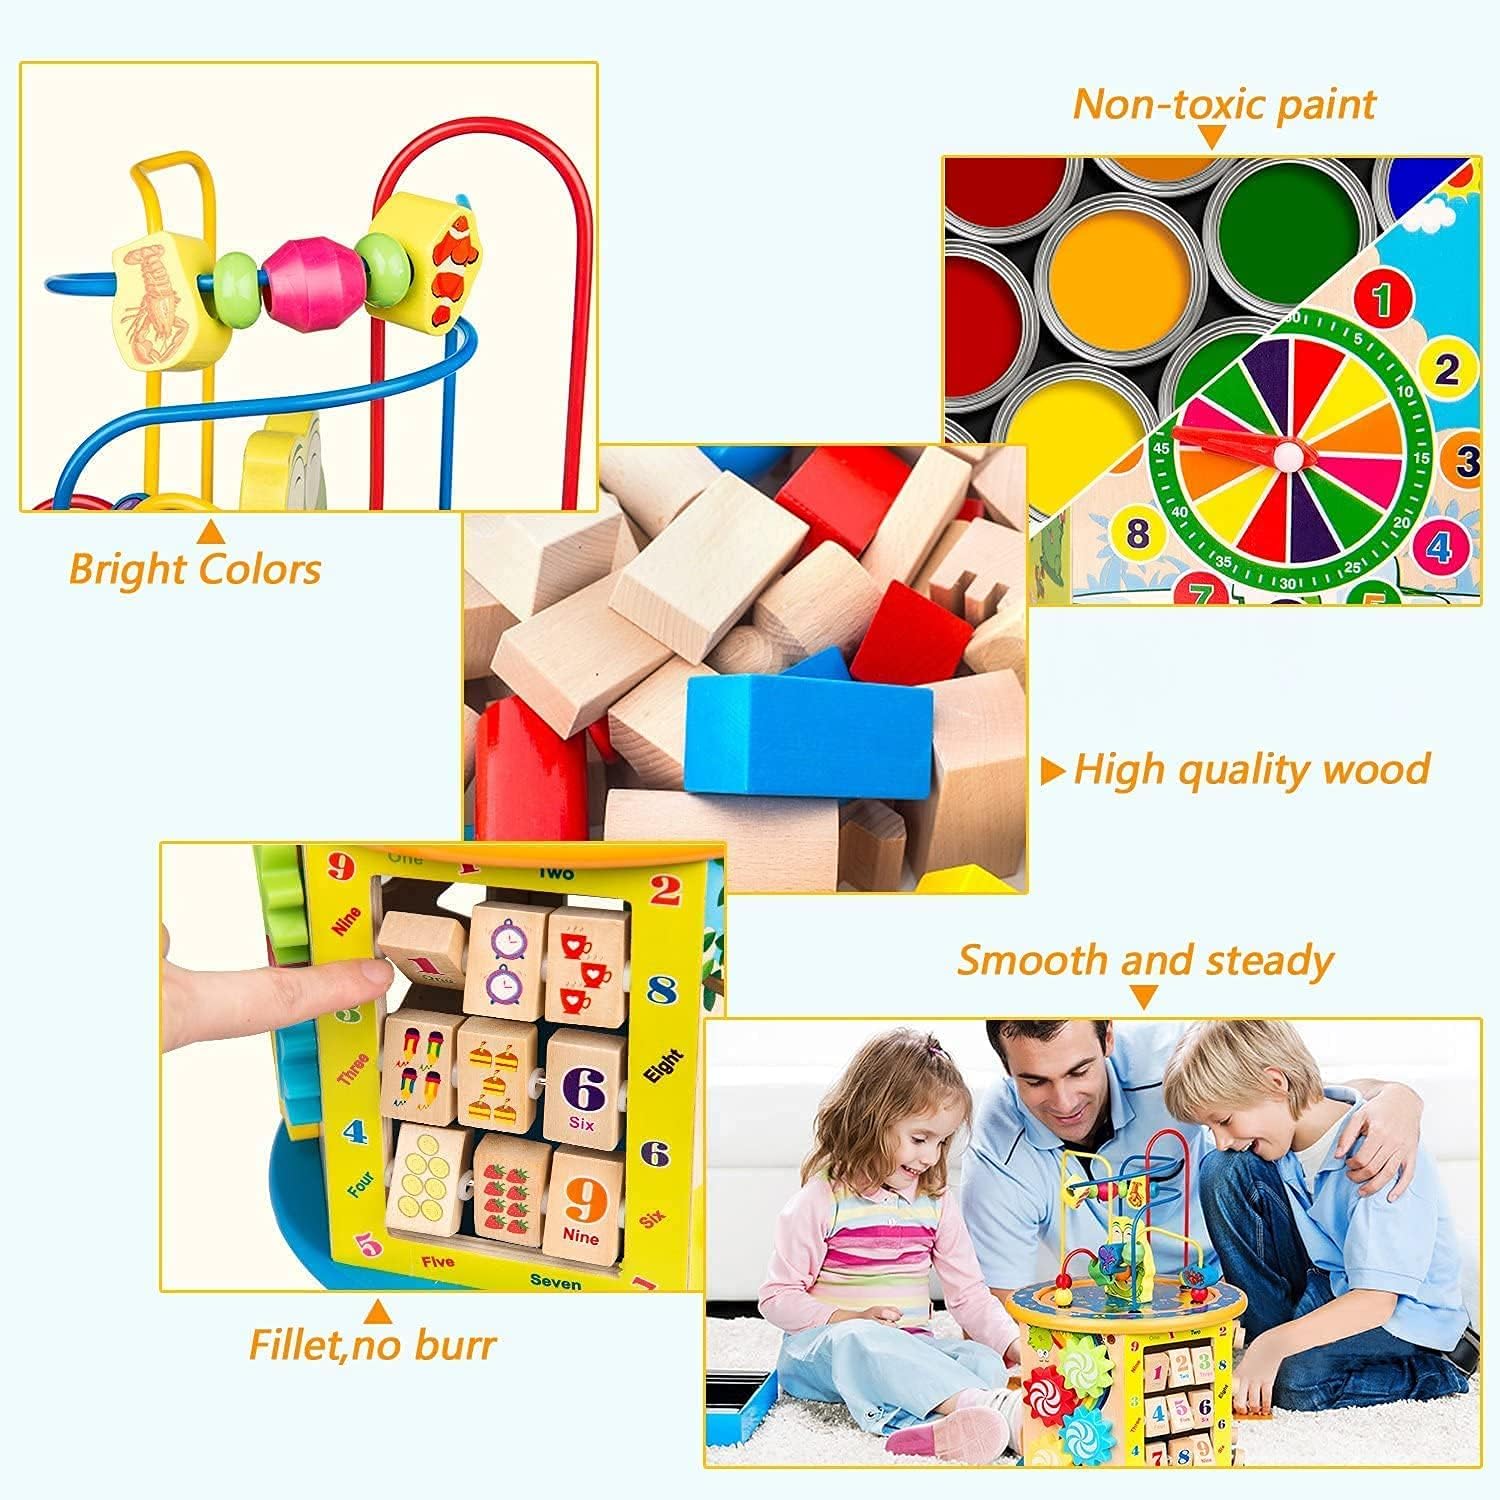 Womdee Activity Cube Toys for Kids Wooden 8-in-1 Activity Blocks Educational Bead Maze Toys Boys Girls Activity Center Large